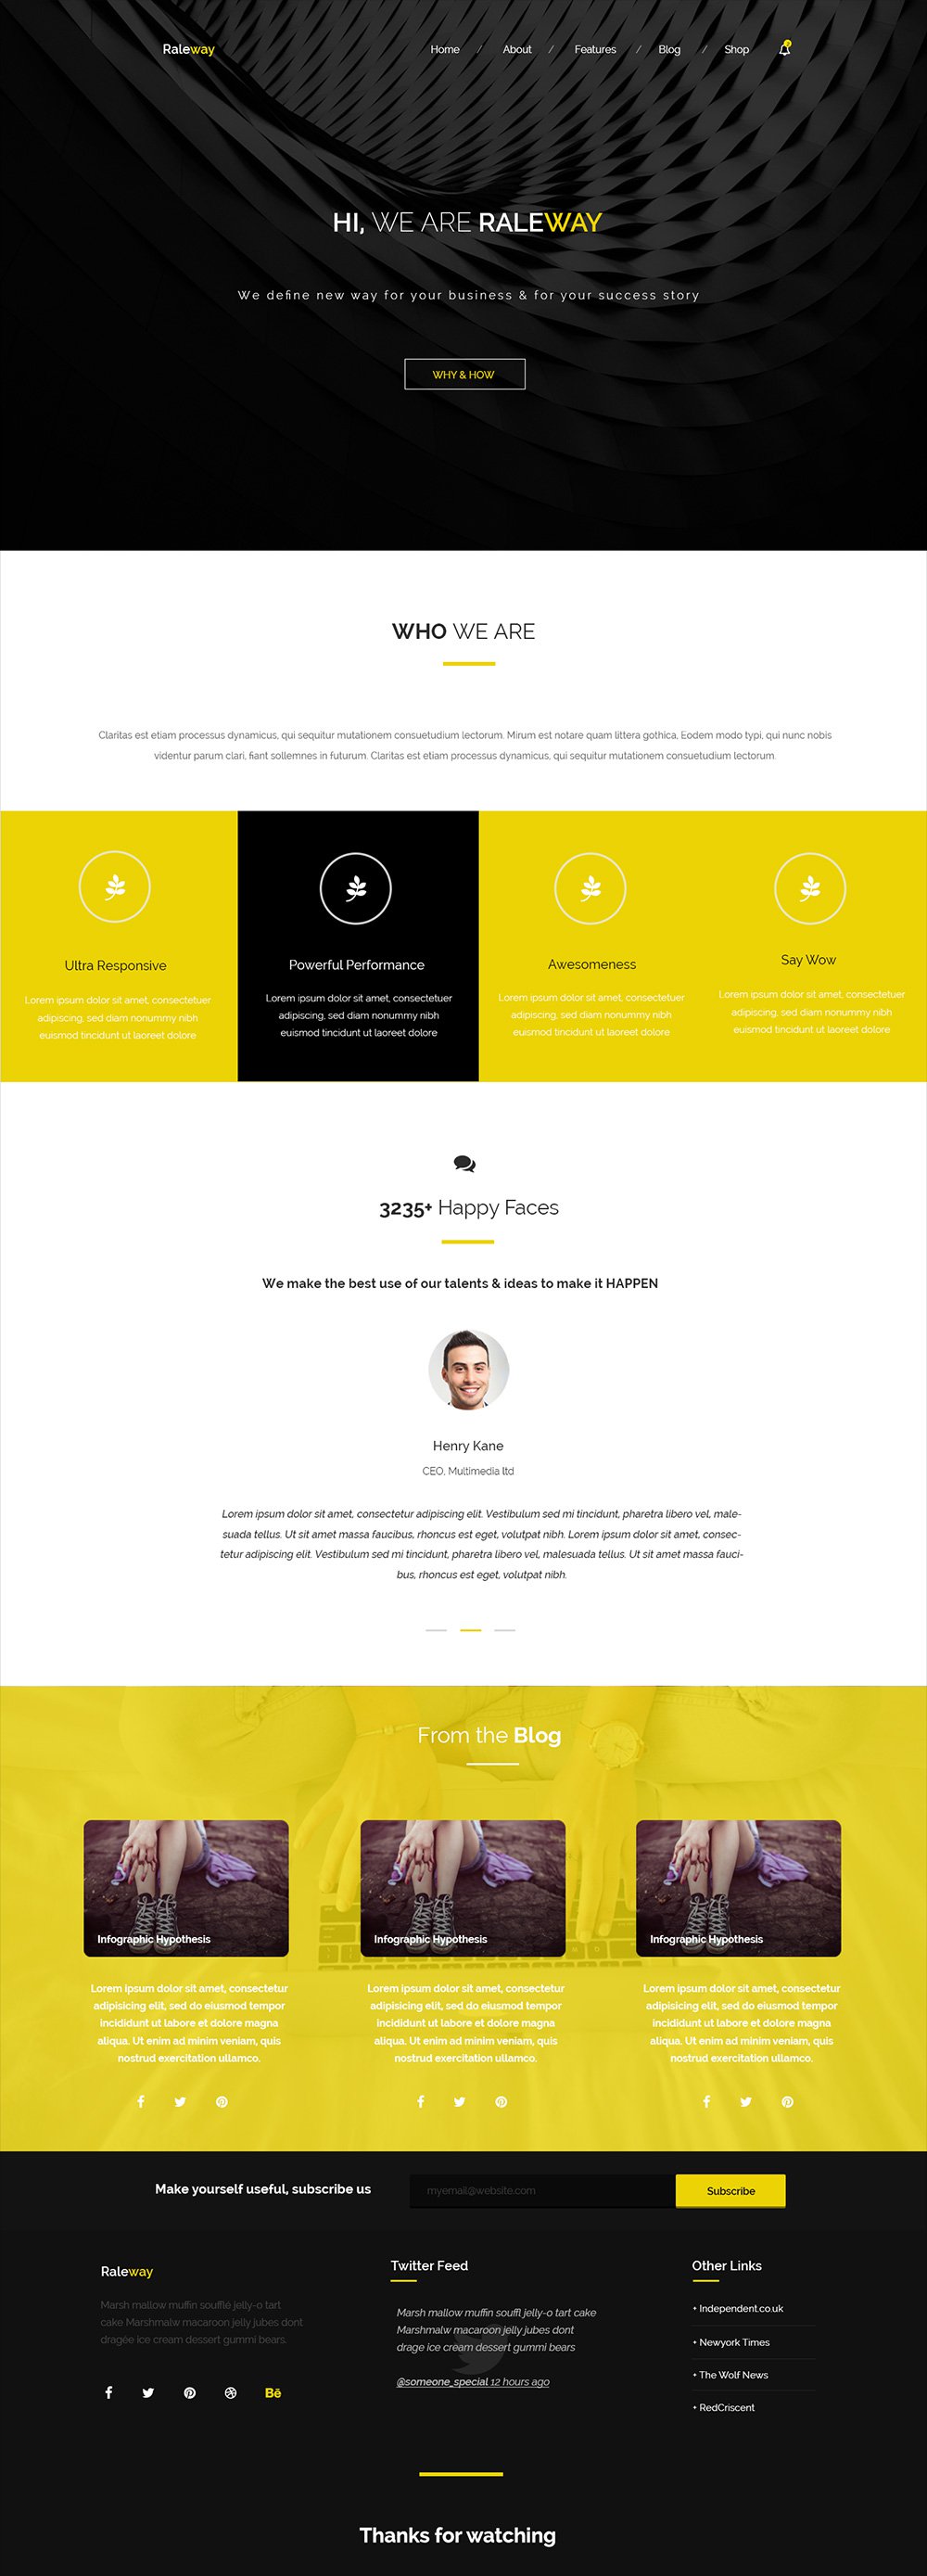 Raleway – Free Web Template for Corporate Agency